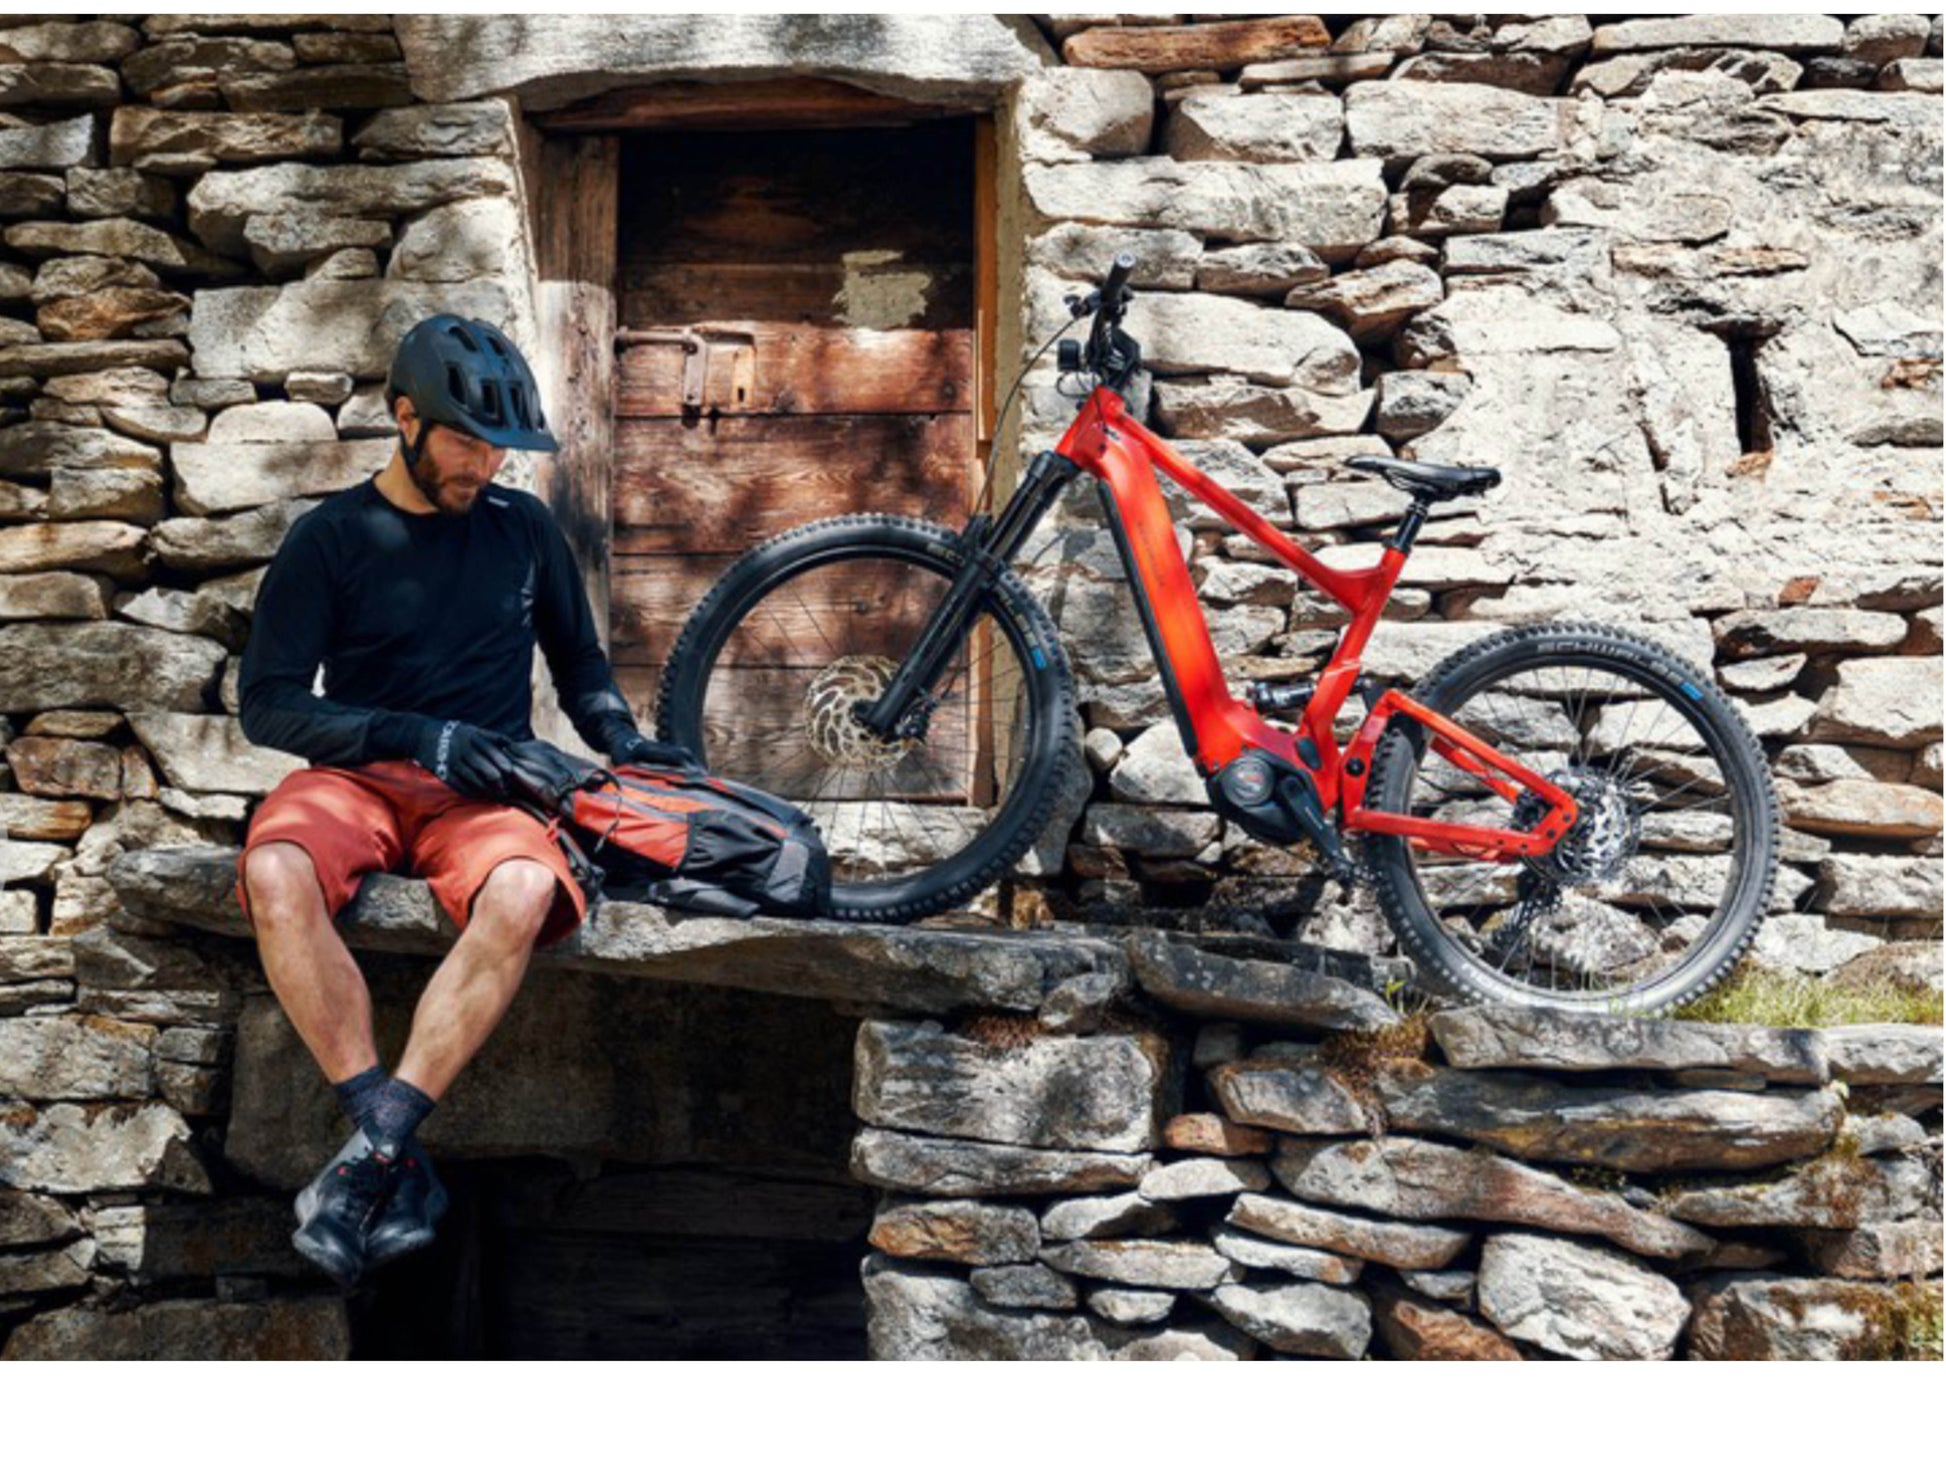 Riese and Muller Delite Mountain Rohloff eMTB full suspension man sitting with bike old stone house